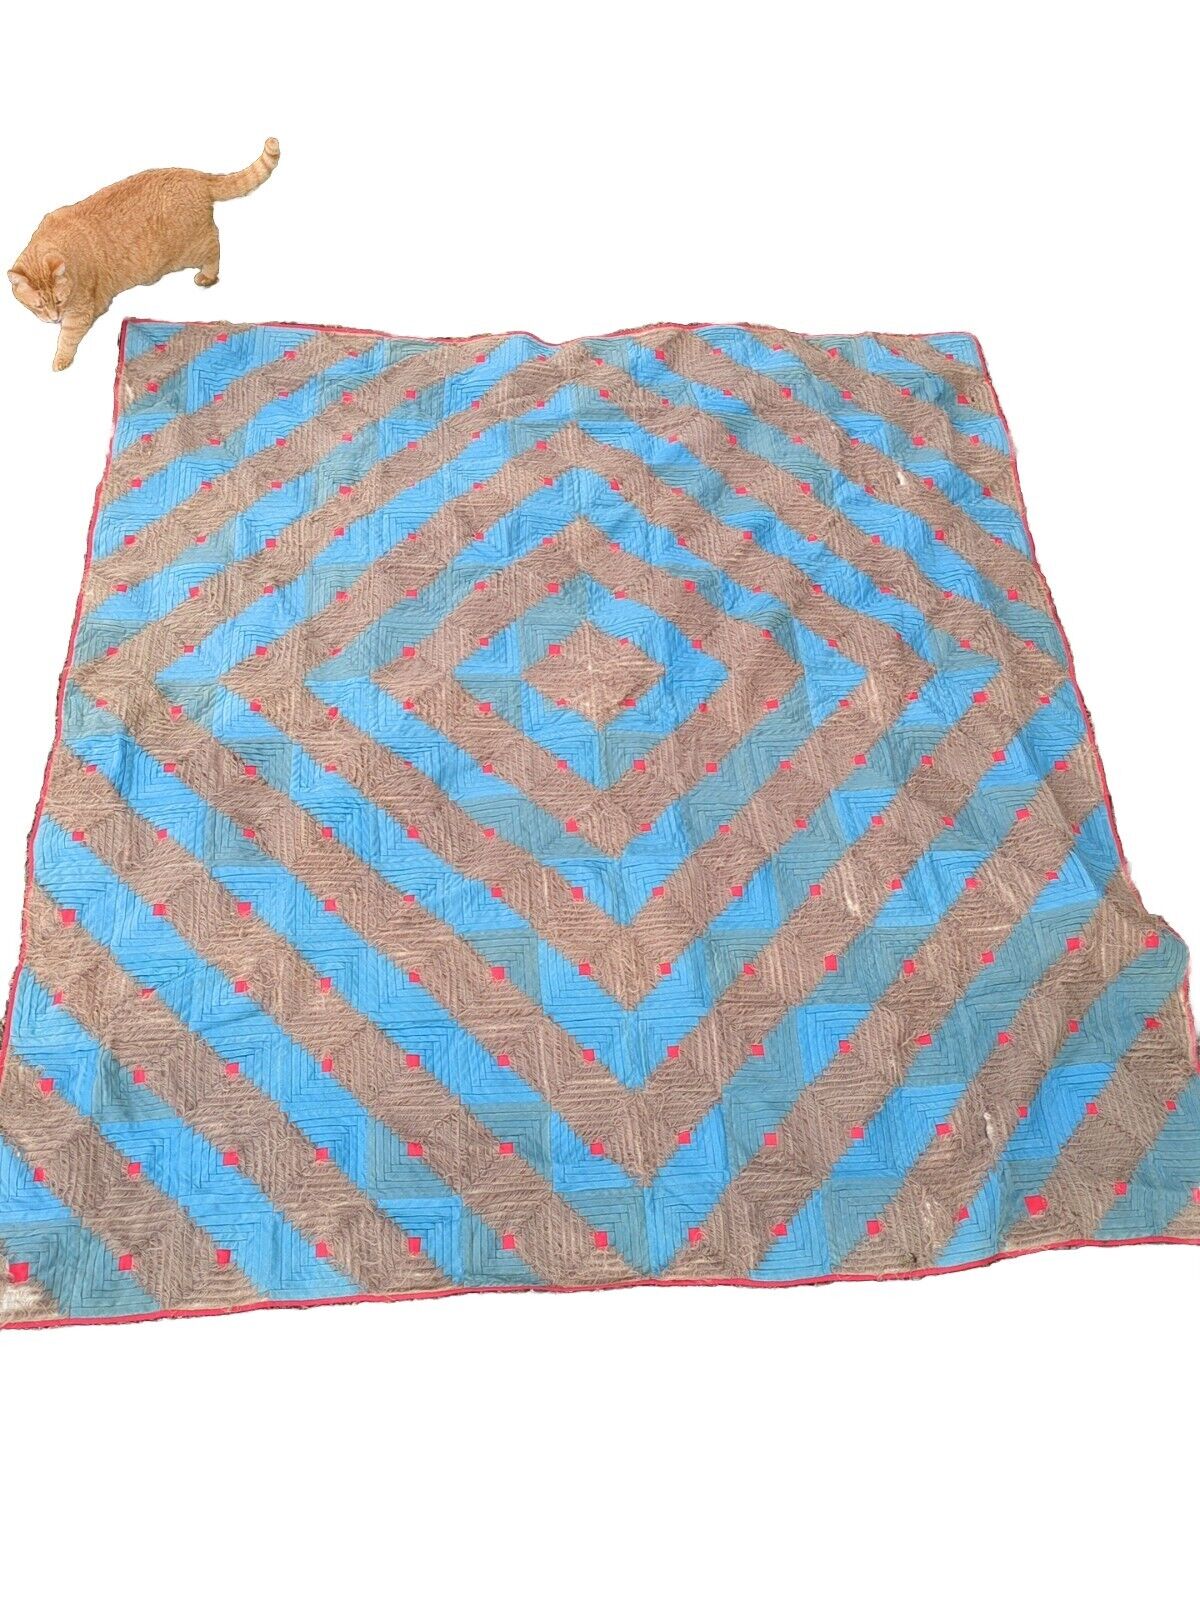 Antique Courthouse Steps Square Geometric Red Blue Diamond Quilt 19th Century